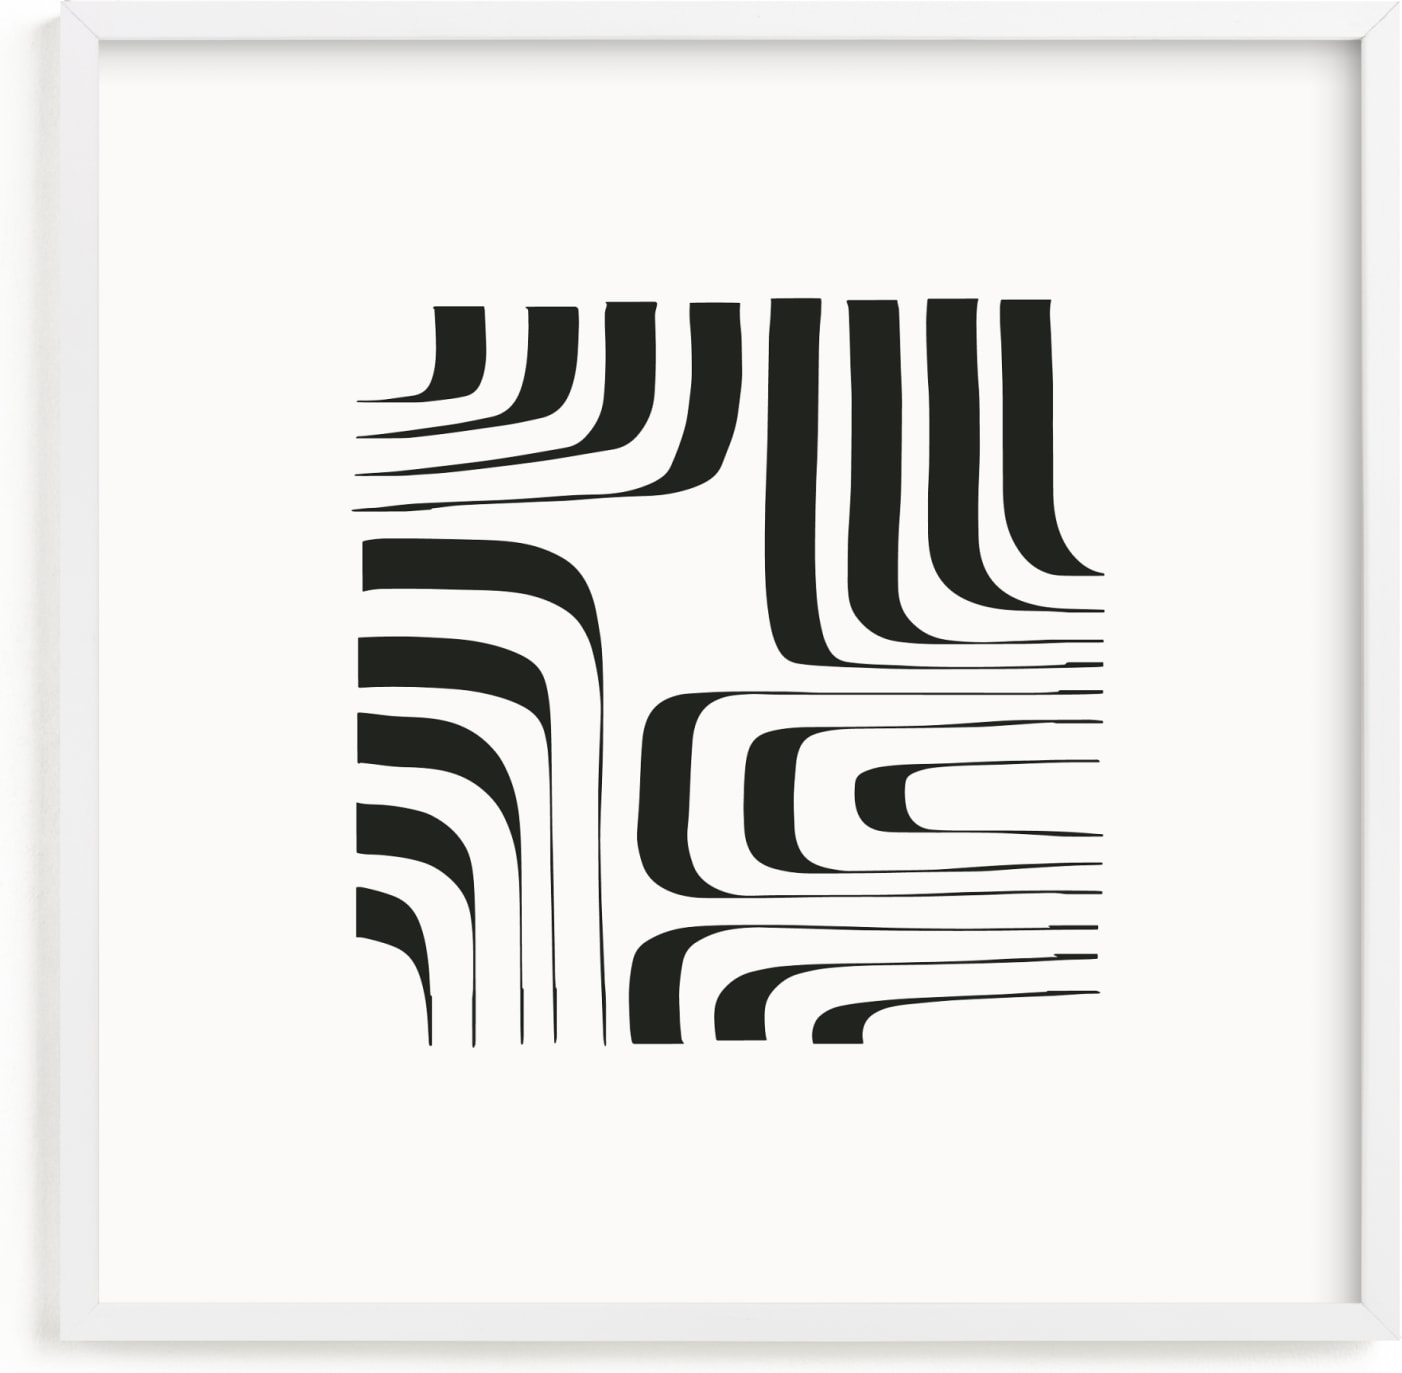 This is a black and white art by Jennifer Morehead called Linear.